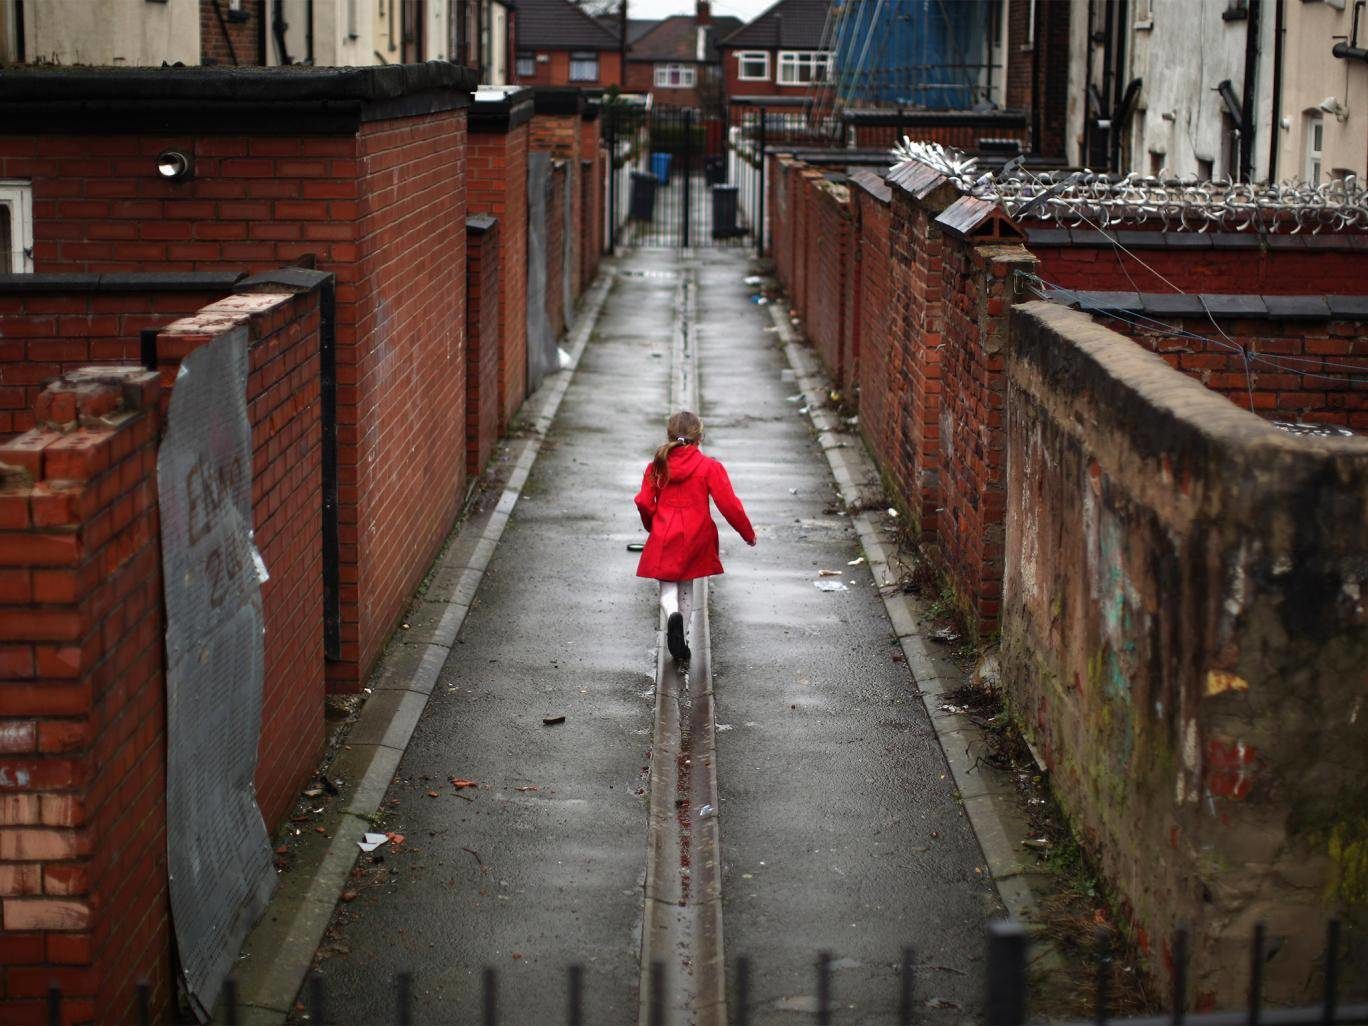 Government figures show 4.1 million children are now living in relative poverty